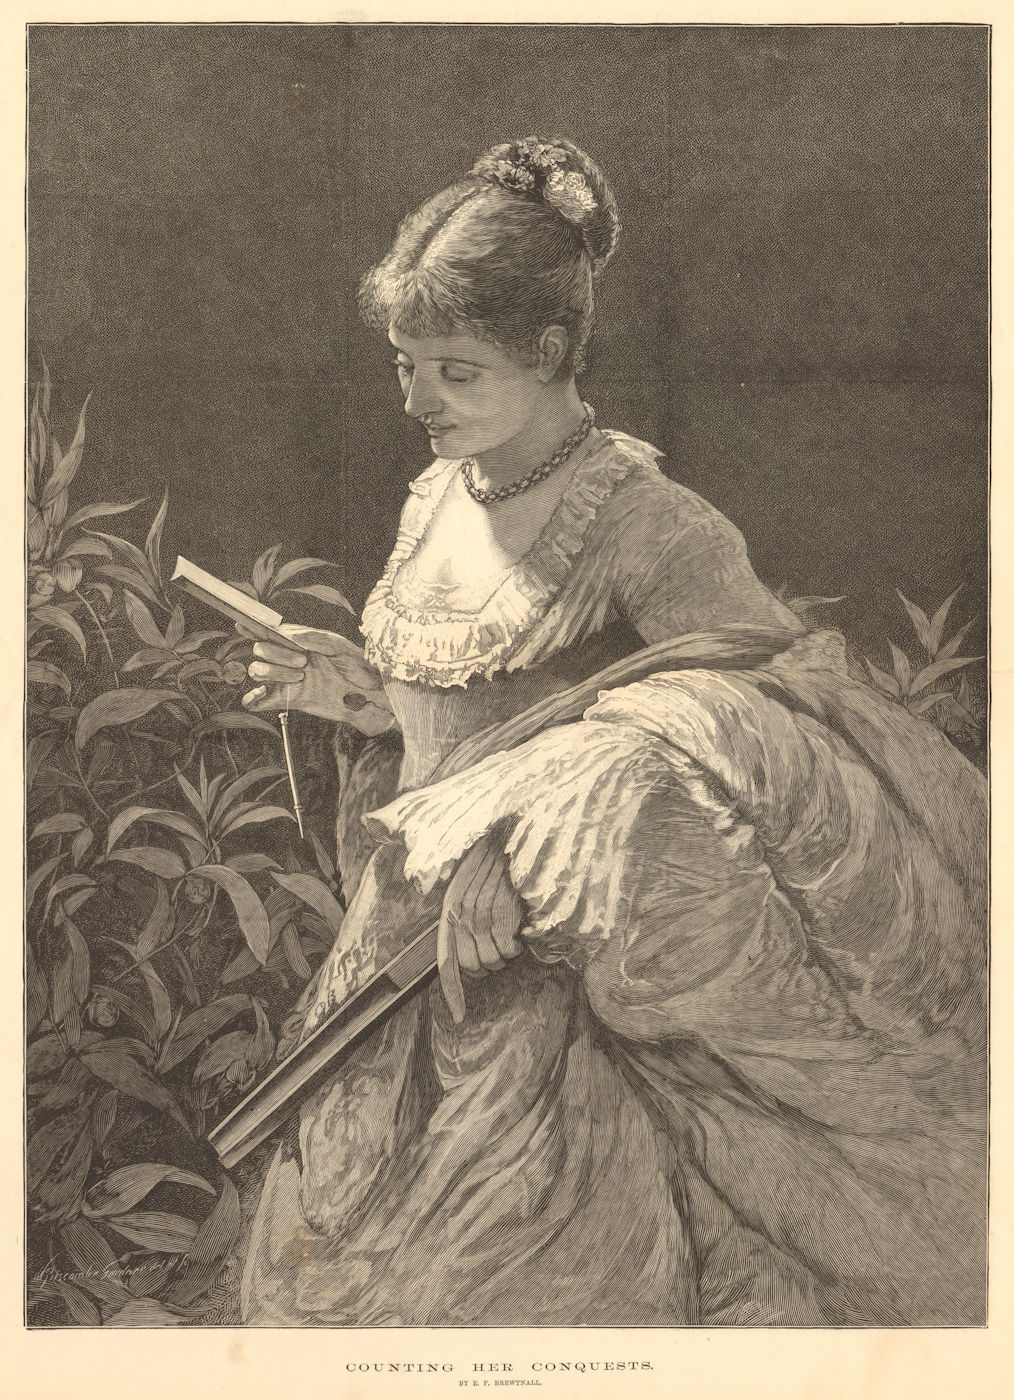 Associate Product Counting her conquests, by E. F. Brewtnall. Pretty Ladies. Fine arts 1877